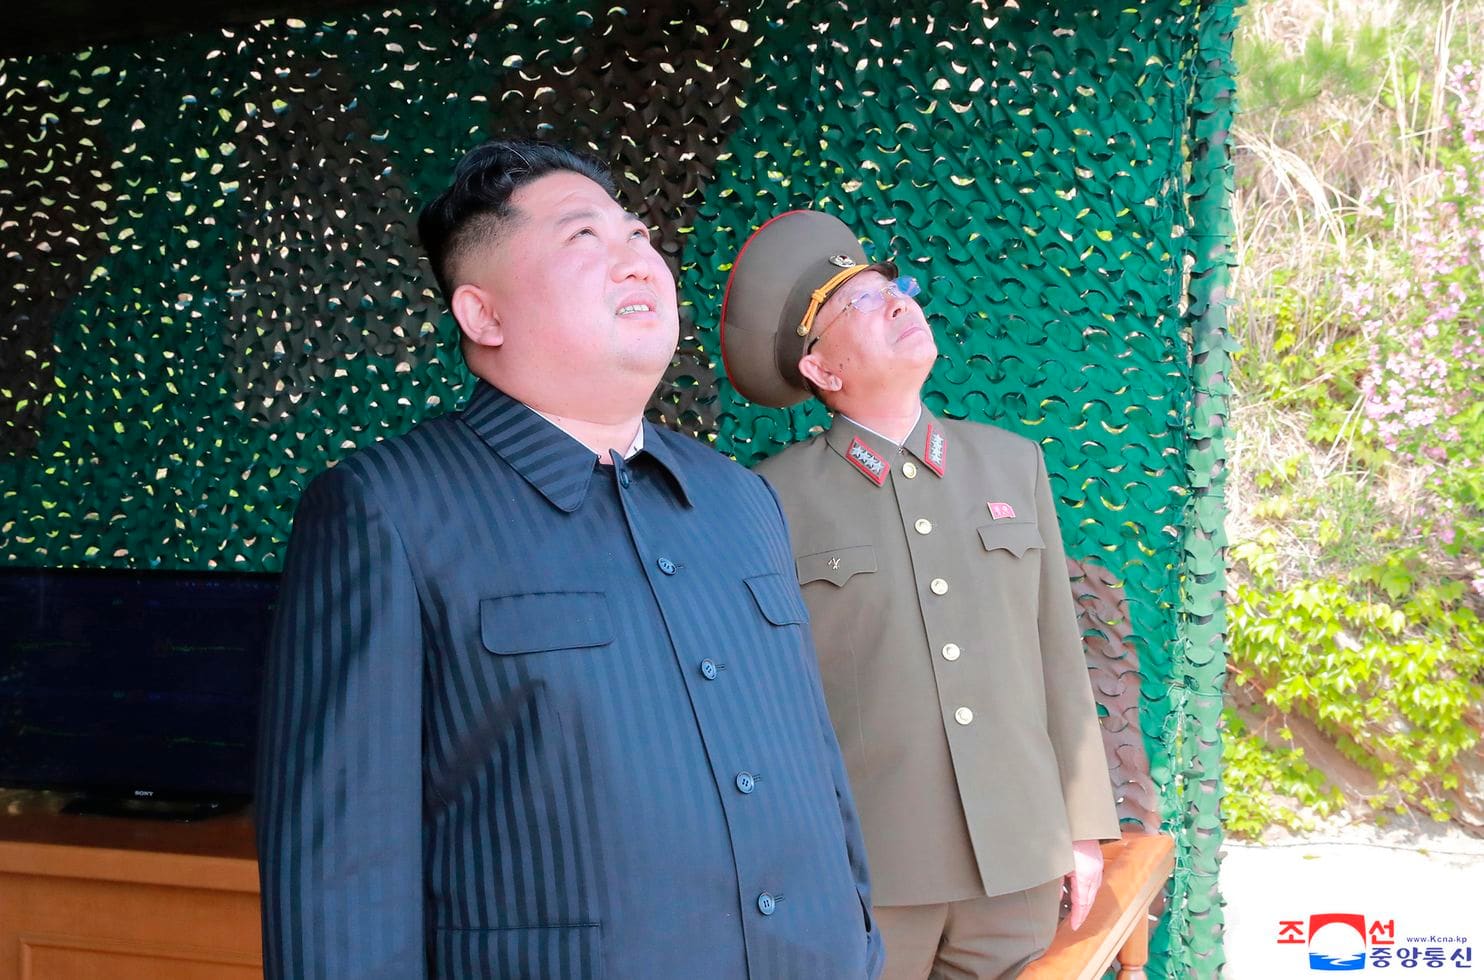 North Korean leader Kim Jong Un observes a weapons test on May 4. (AP/AP)